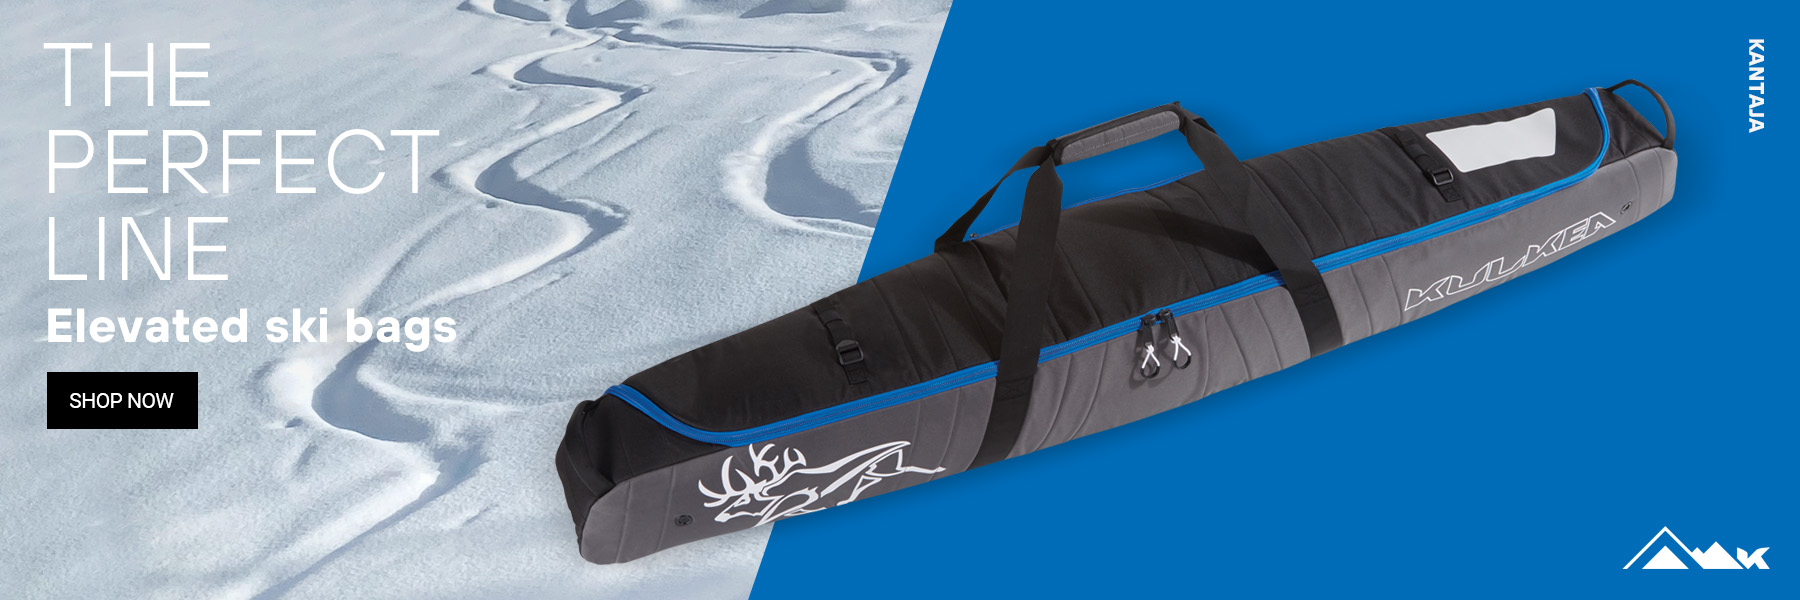 The Perfect Line - Elevated Ski Bags - Shop Now